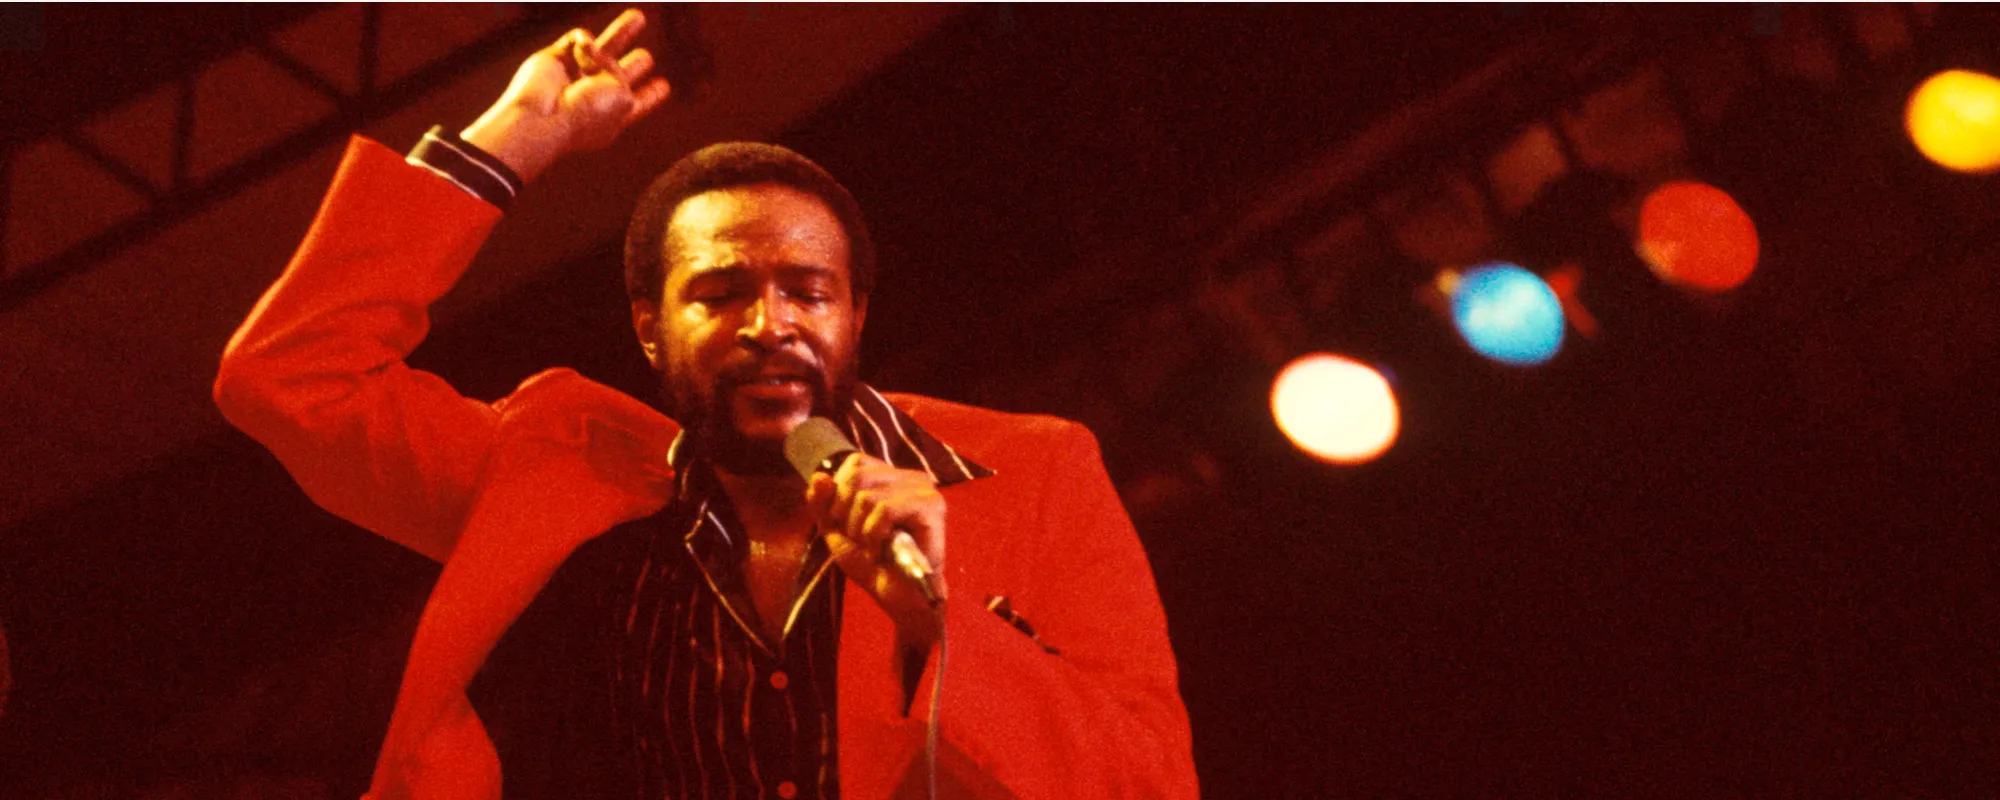 Meaning Behind Marvin Gaye’s Sensual Hit “Let’s Get It On”